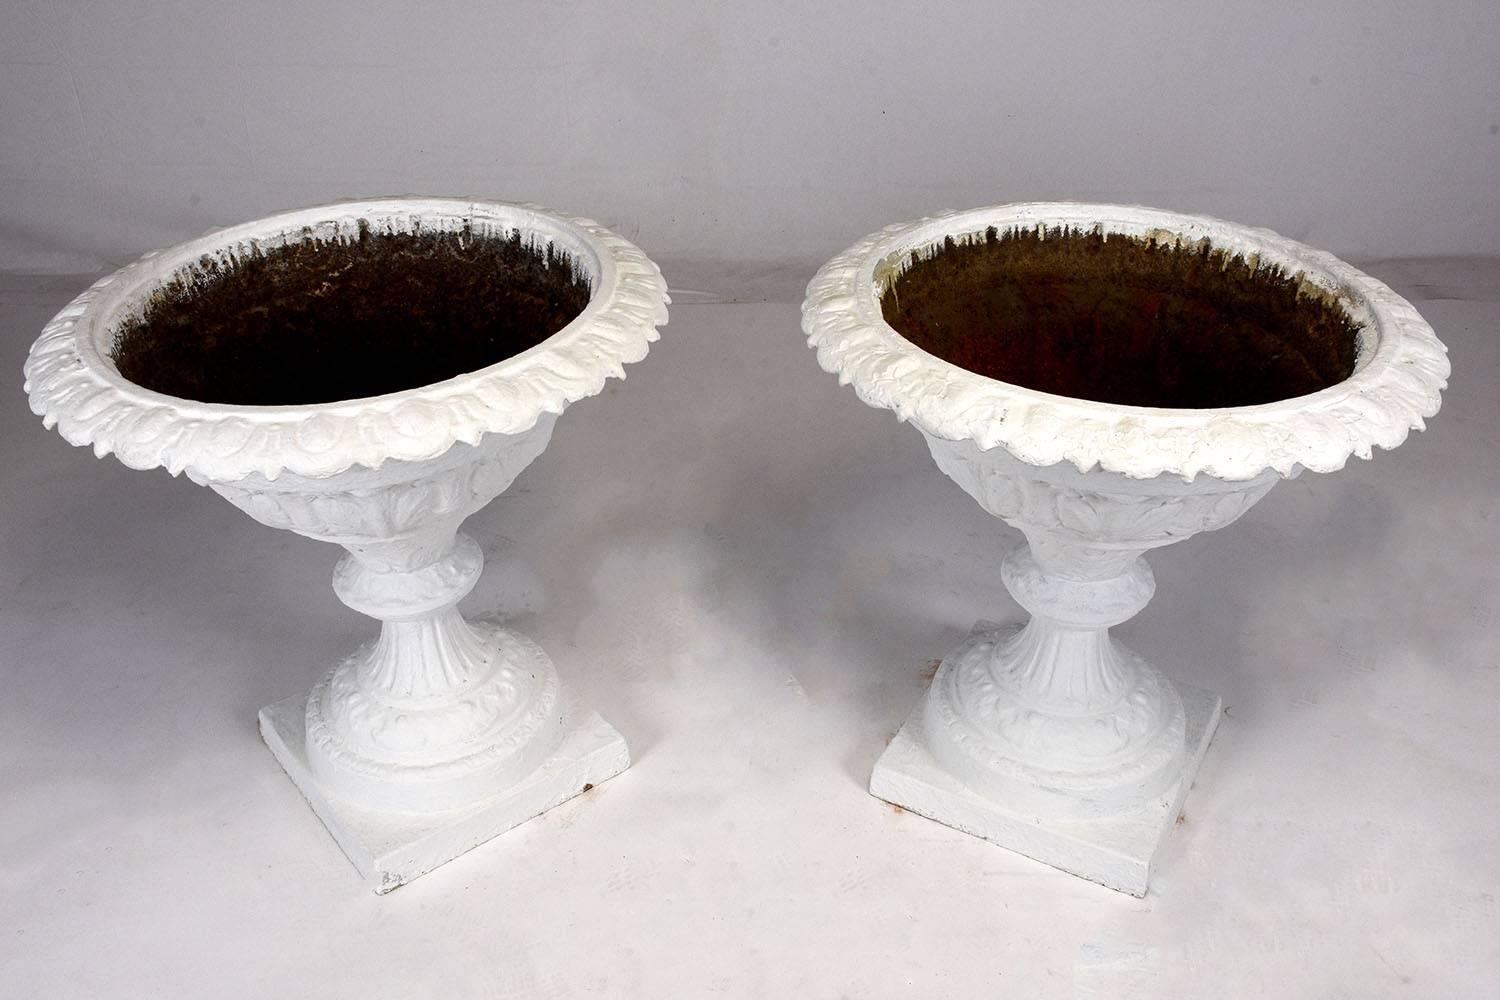 This pair of large planters is made from cast iron that has been painted in an off-white color. The planters are beautifully adorned with floral motif designs on the lip, egg and dart decorative band, fleur-de-lis designs, and architectural